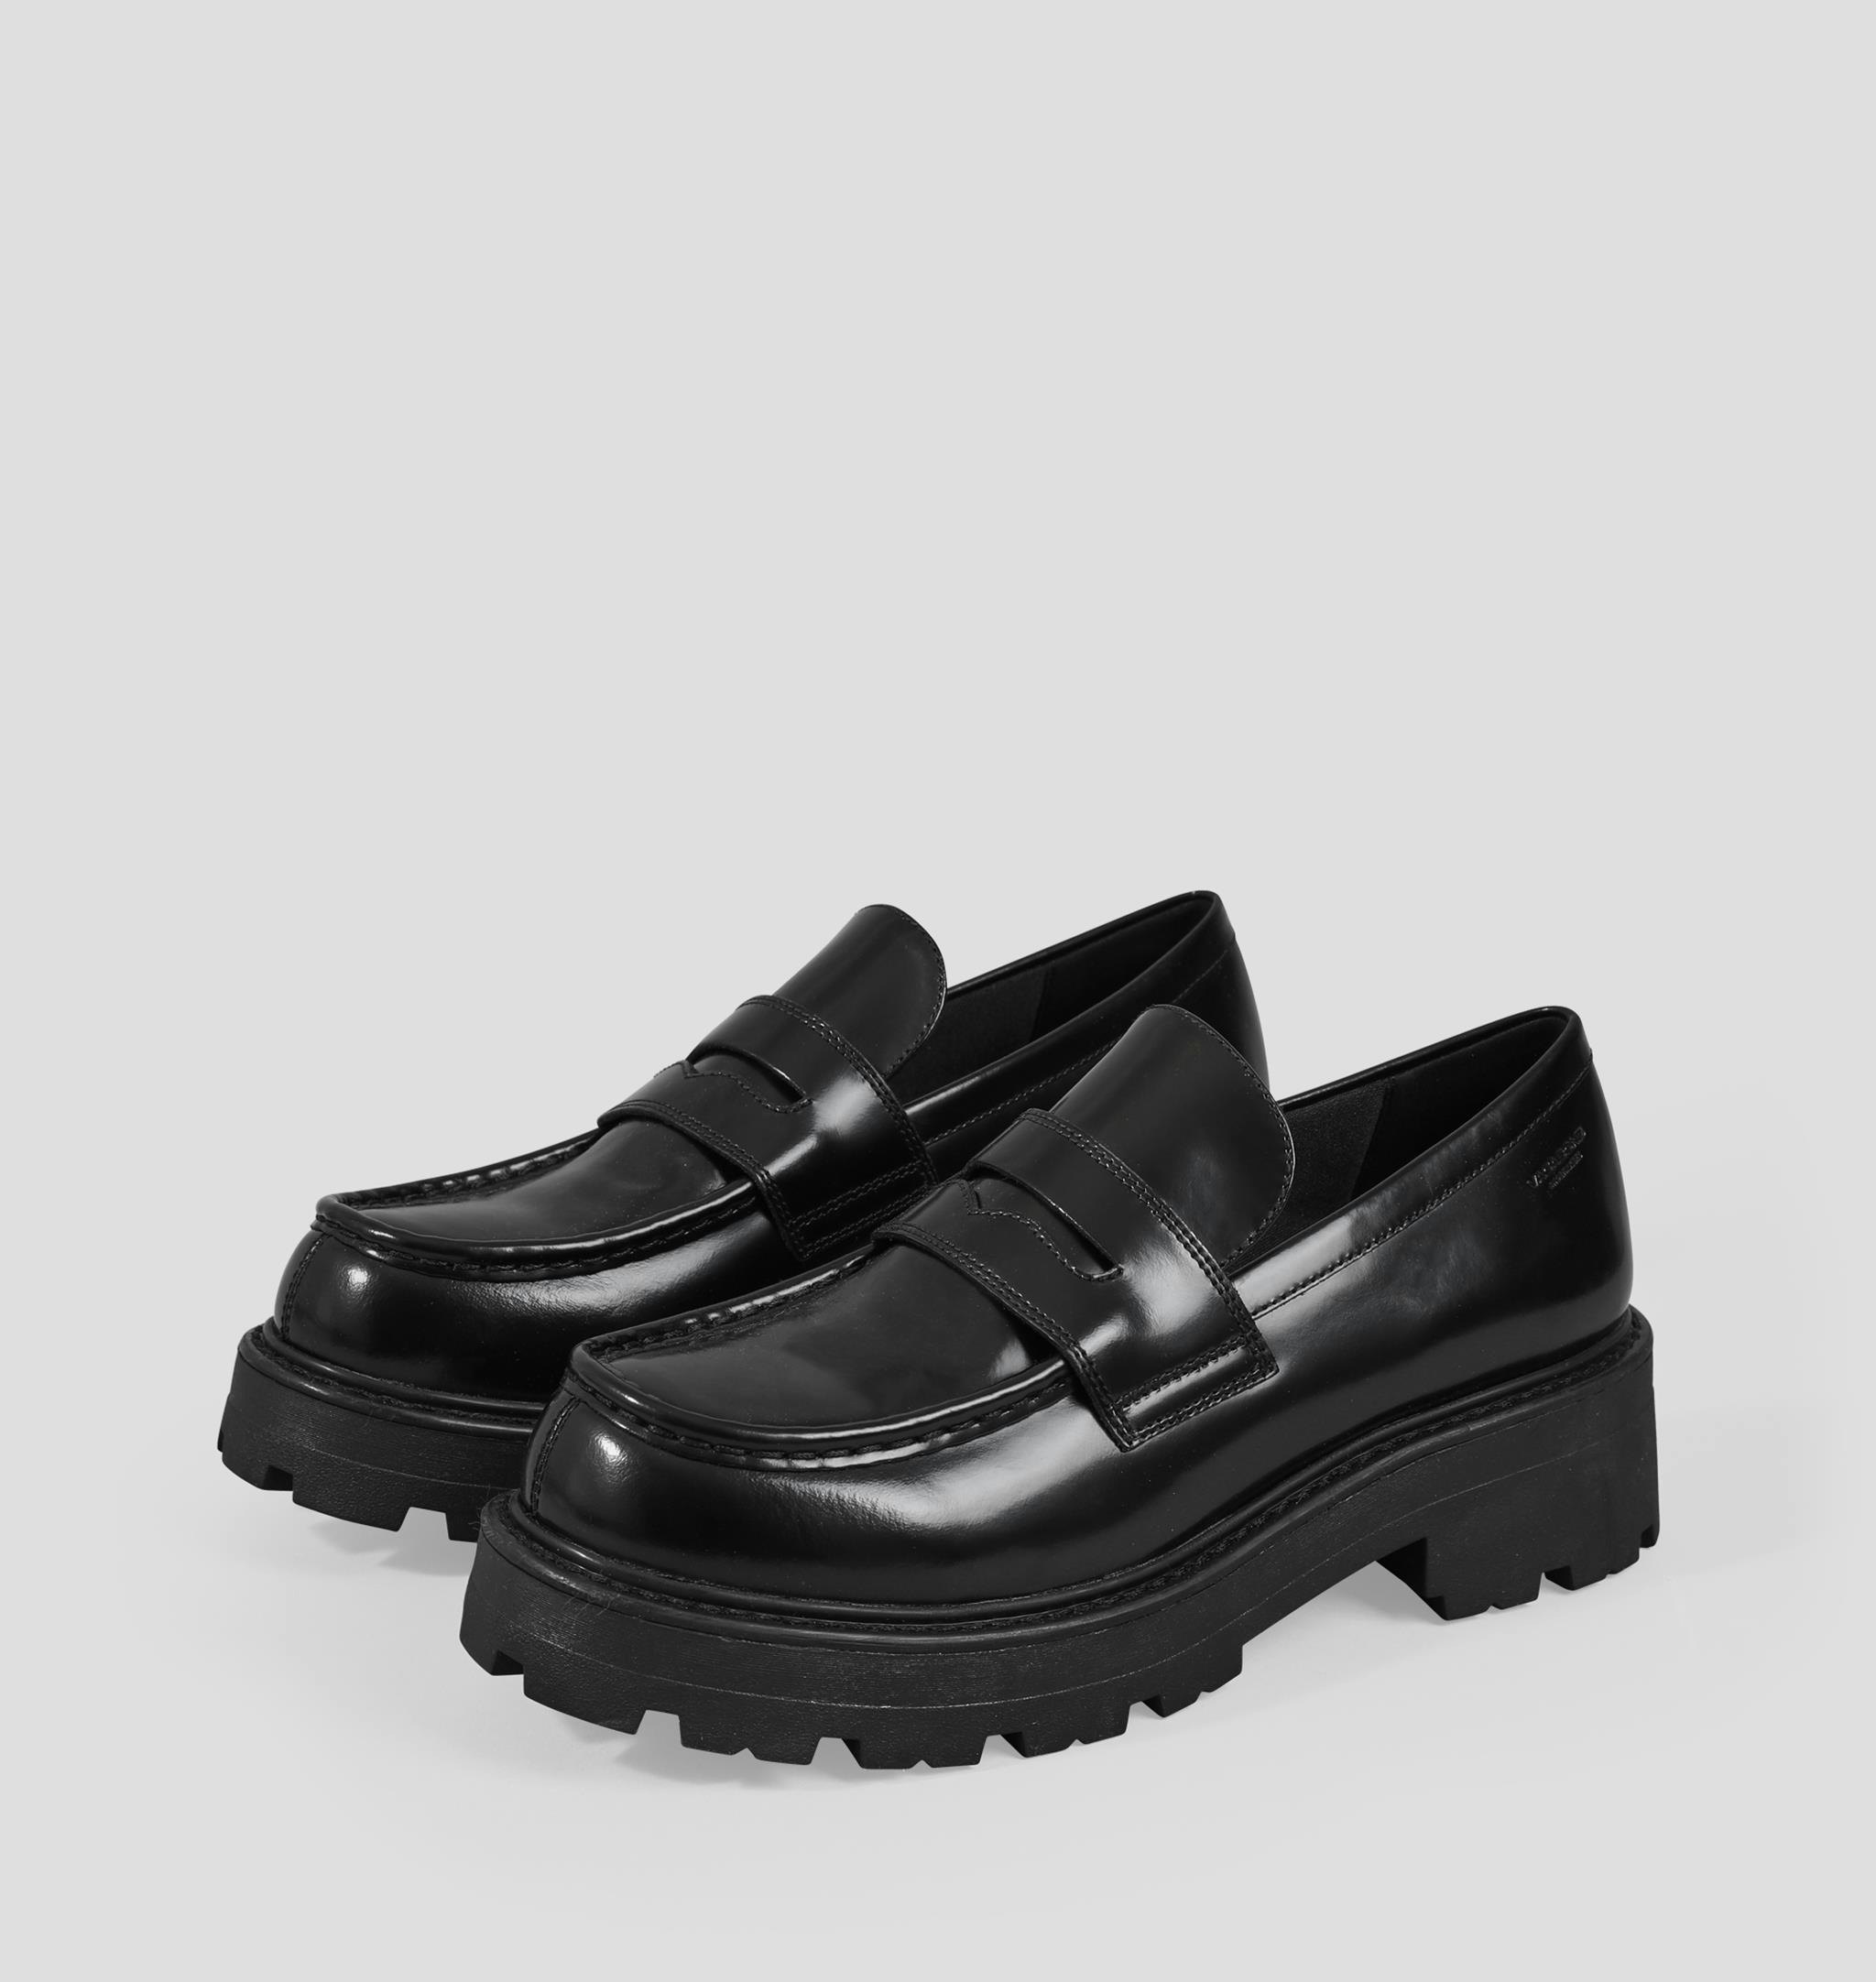 Shop Chunky Platform Loafers For Fall 